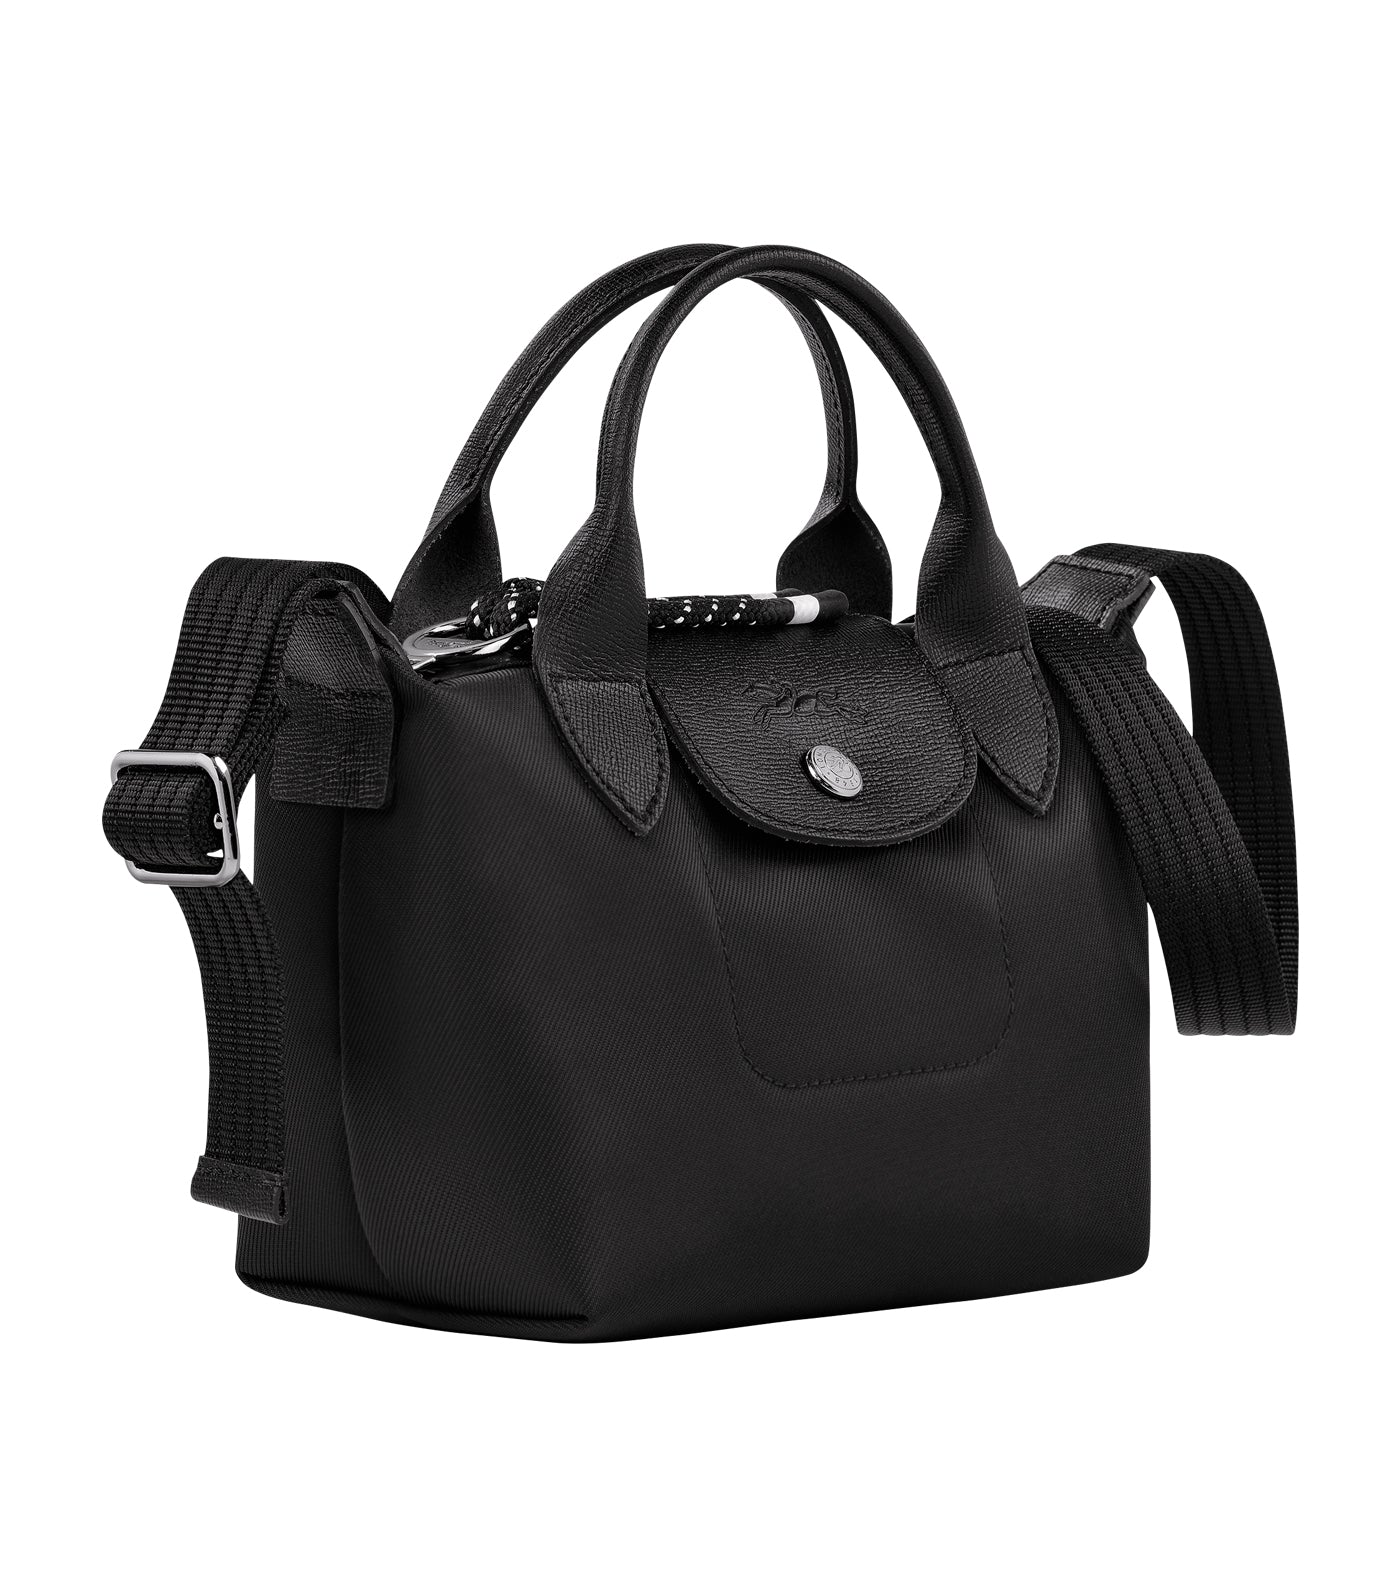 Le Pliage Energy L Tote bag Black - Recycled canvas (10163HSR001)